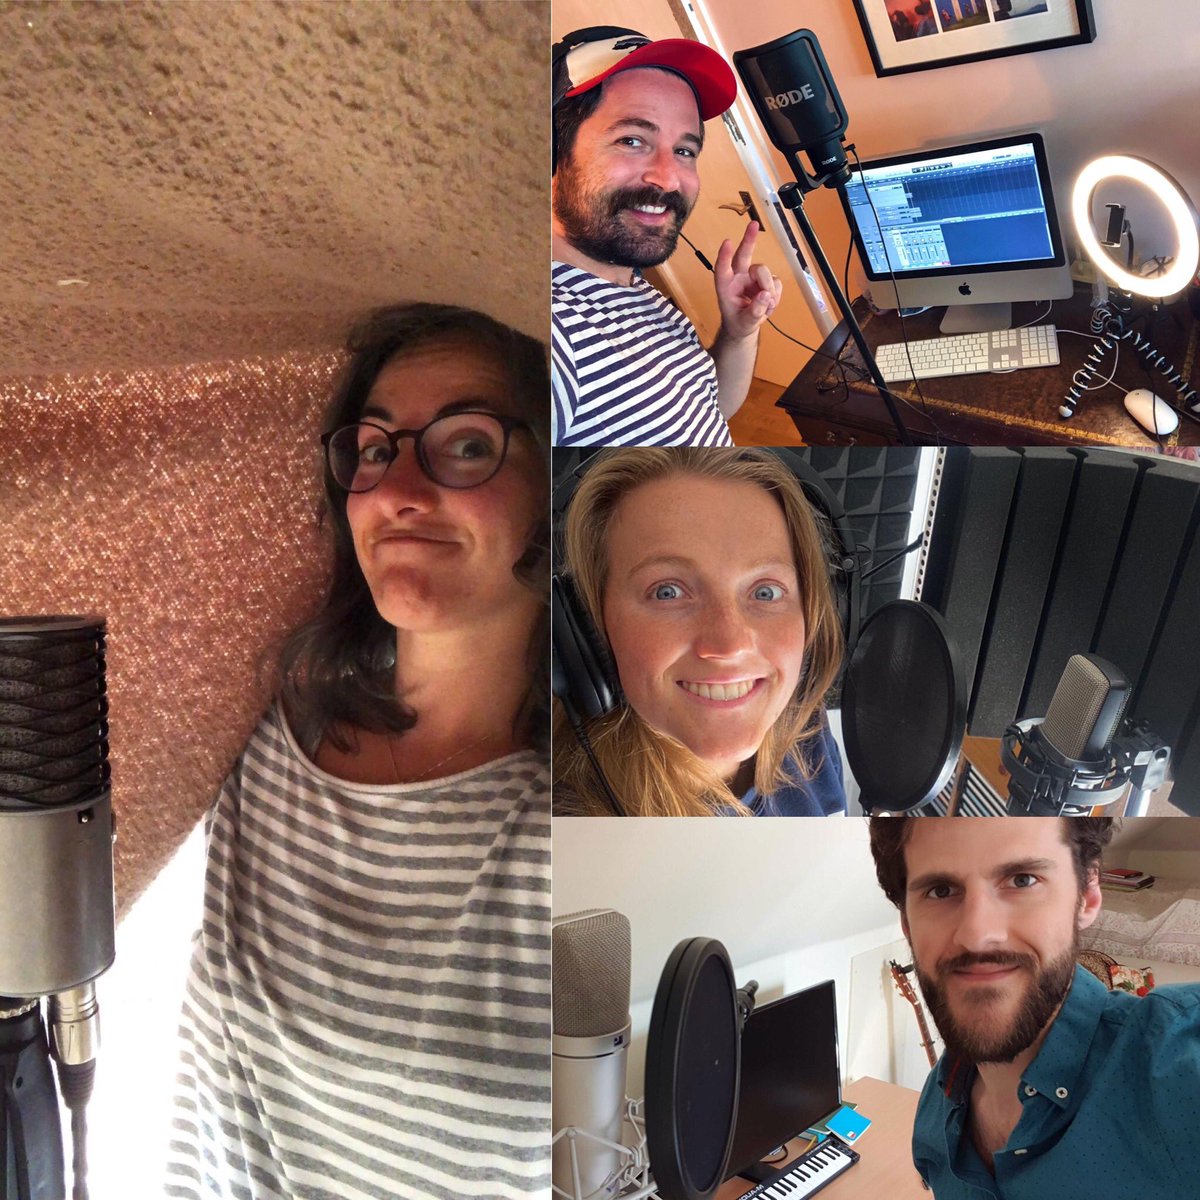 Ready to hit the ground running this week from our makeshift studios. We’ve had to get pretty creative in some cases. Curtains and blankets and towels, oh my! Stay Tuned! #newmusic #swinglesathome